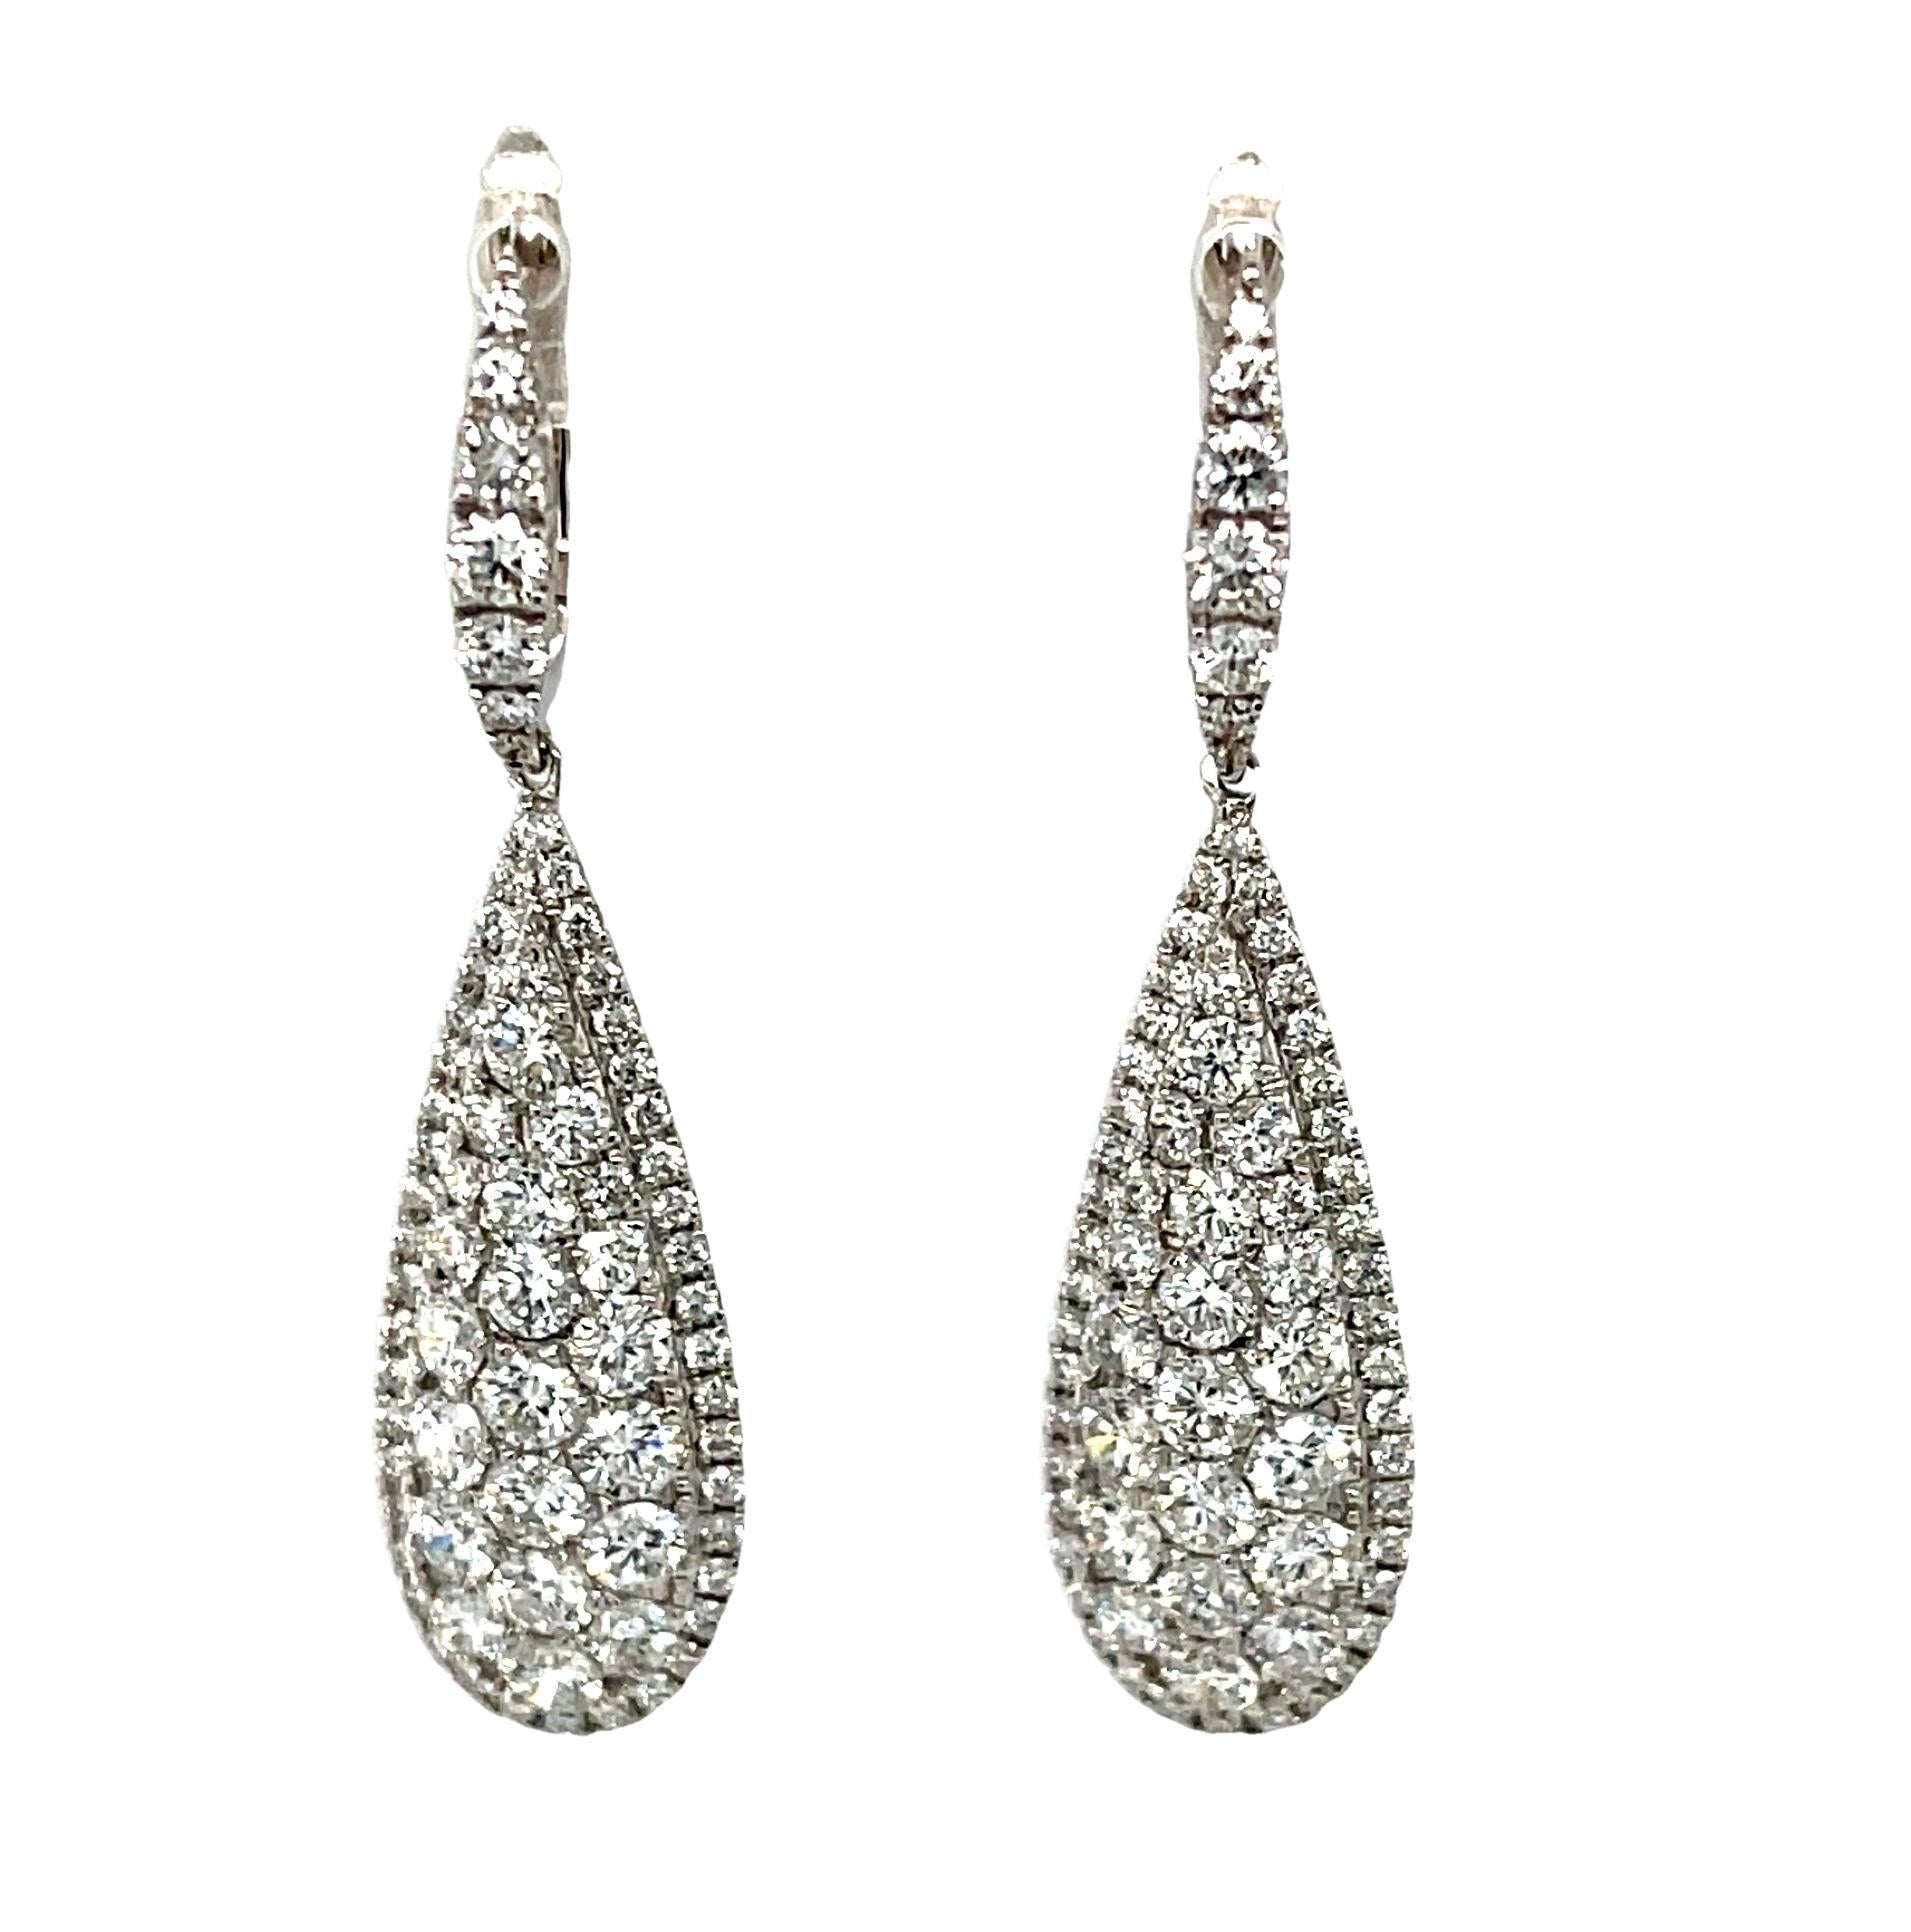 These elegant diamond and white gold dangle earrings are a beautiful way to start, or add to, a fine jewelry wardrobe. They are perfect for a wedding day as well as a lifetime of special events. Sparkling round brilliant diamonds are pave-set in 18k